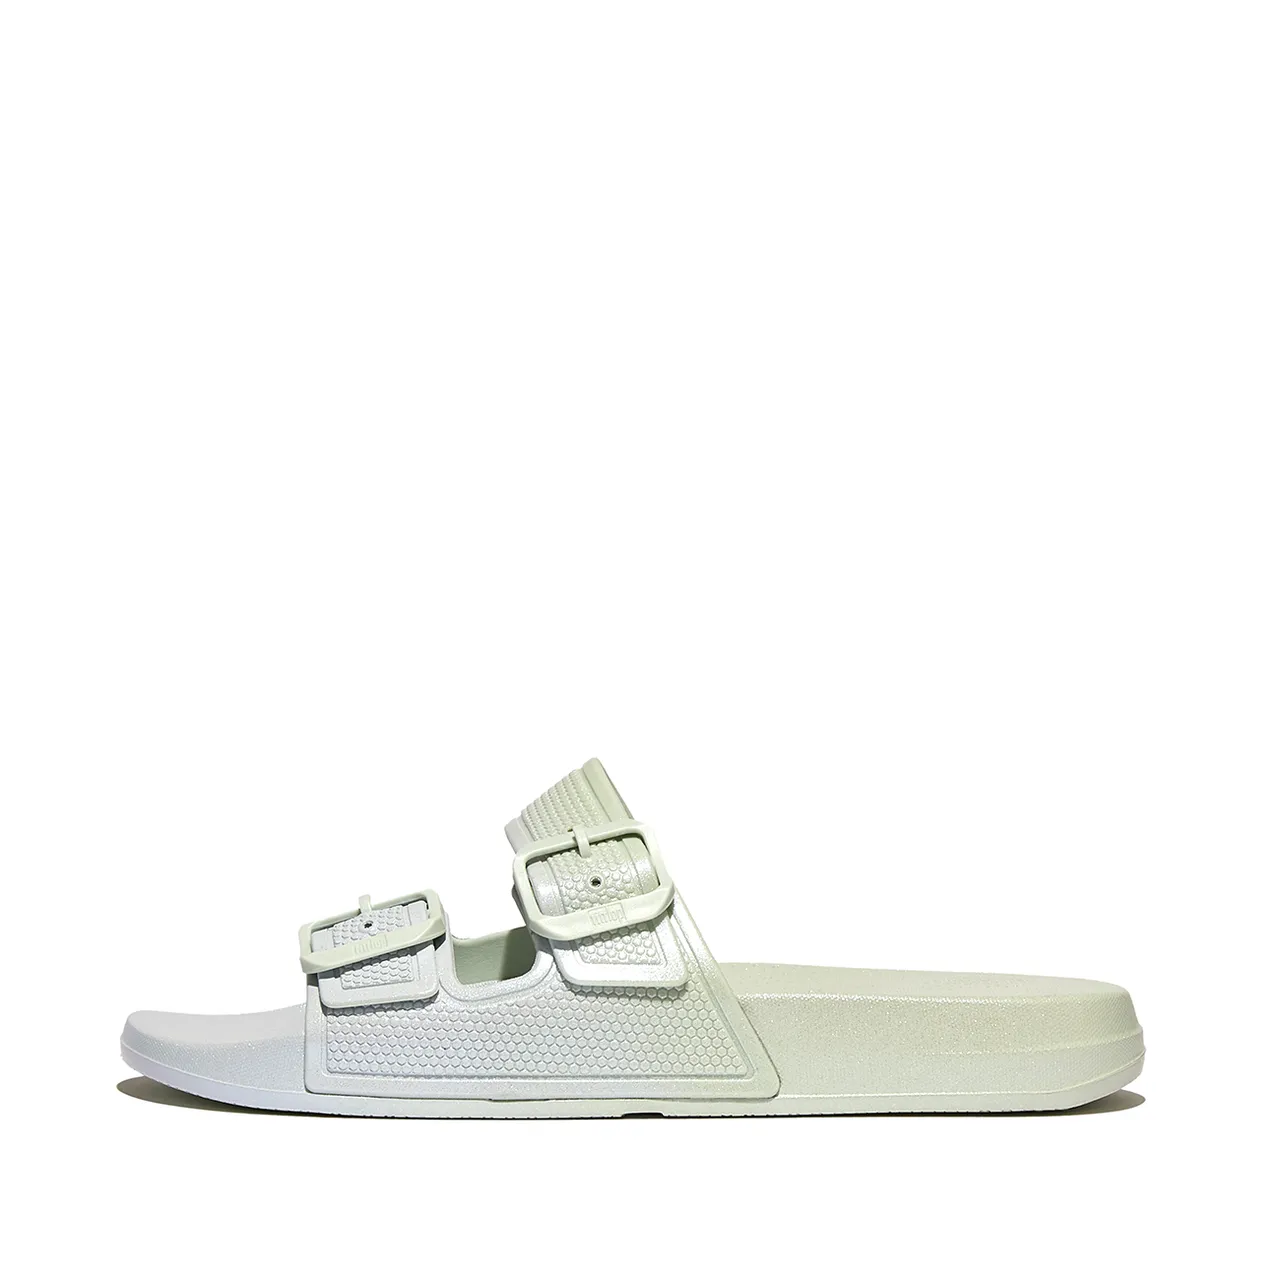 FitFlop Iqushion iridescent two-bar buckle slides